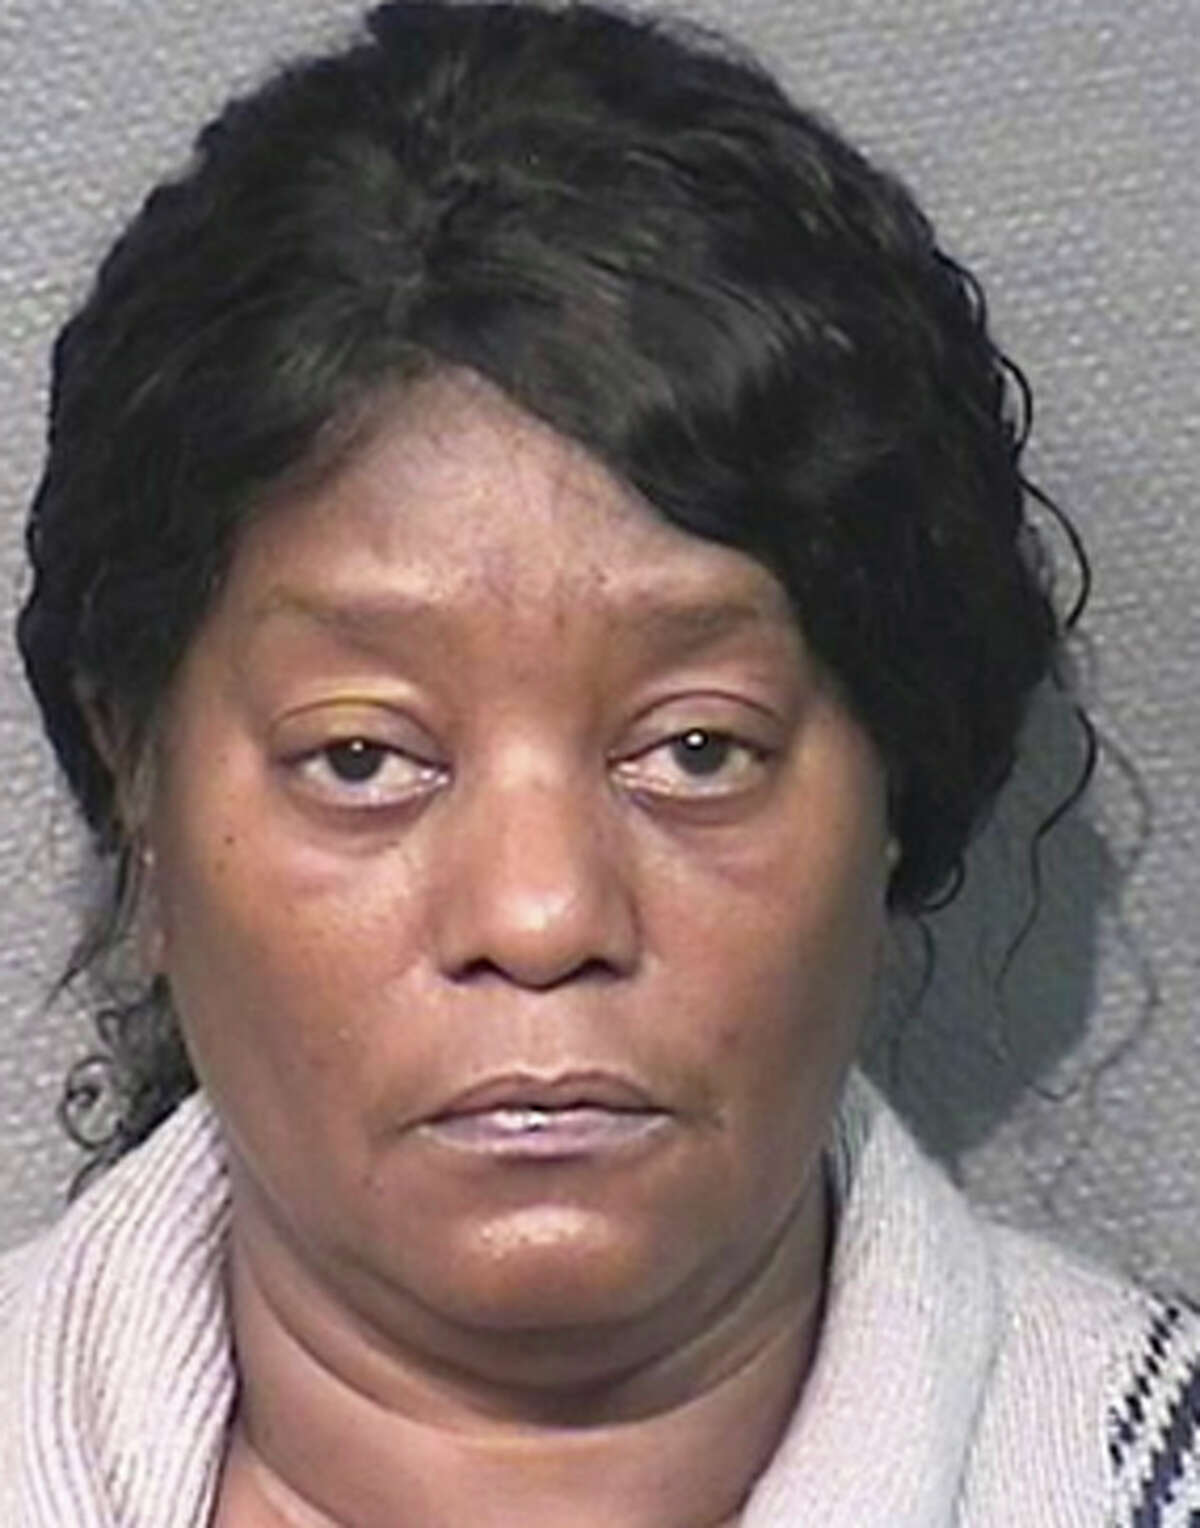 Debra Davis, 58, has been charged with murder in the death of her common-law husband, 49-year-old Rodney Johnson.